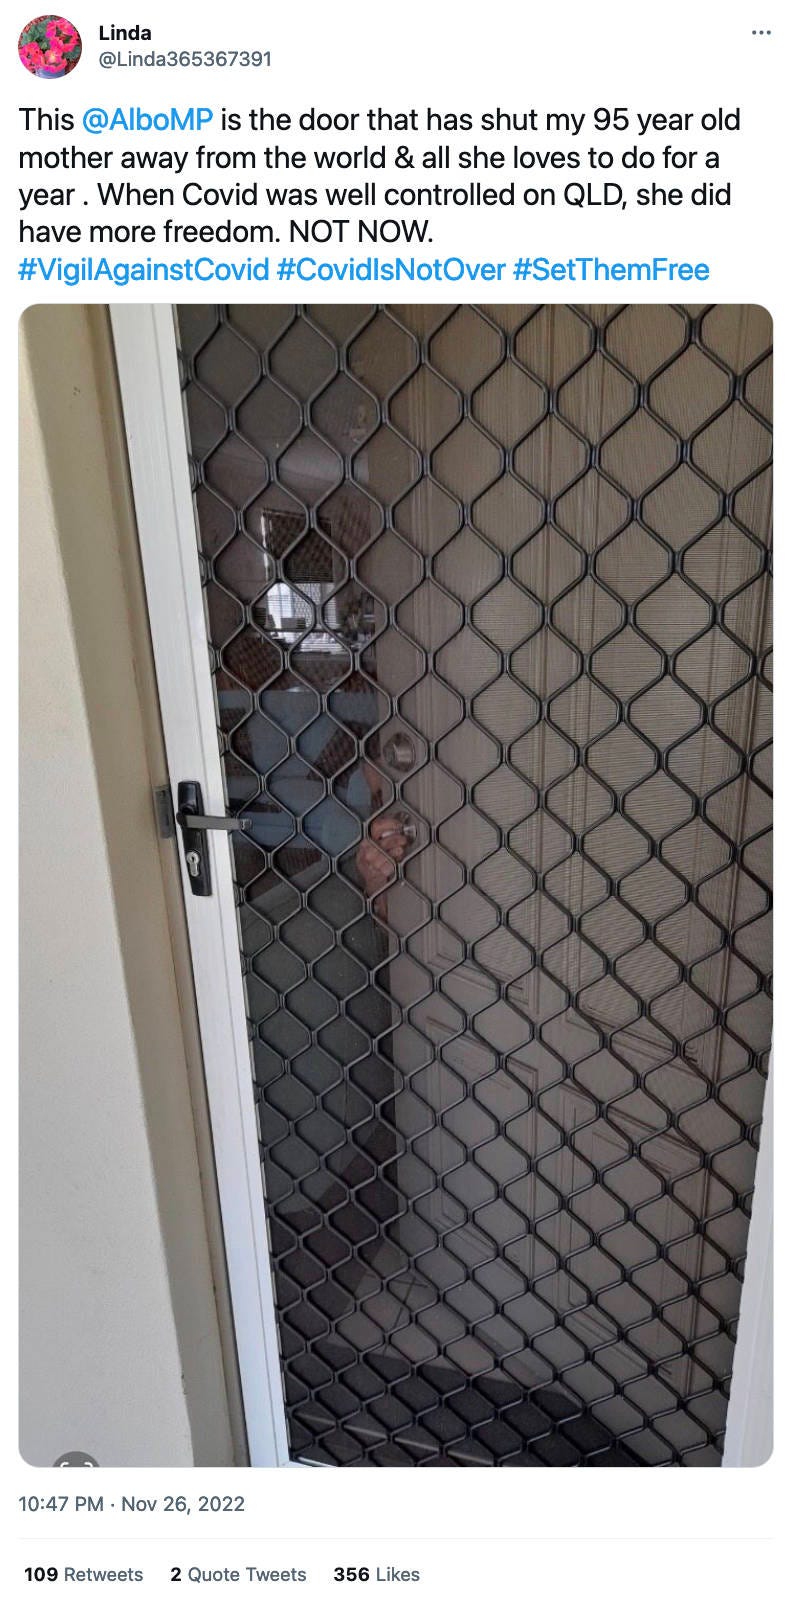 The picture is a tweet from Linda This ⁦⁦is the door that has shut my 95 year old mother away from the world & all she loves to do for a year . When Covid was well controlled on QLD, she did have more freedom. NOT NOW. #VigilAgainstCovid #CovidIsNotOver #SetThemFree 10:47 PM · Nov 26, 2022